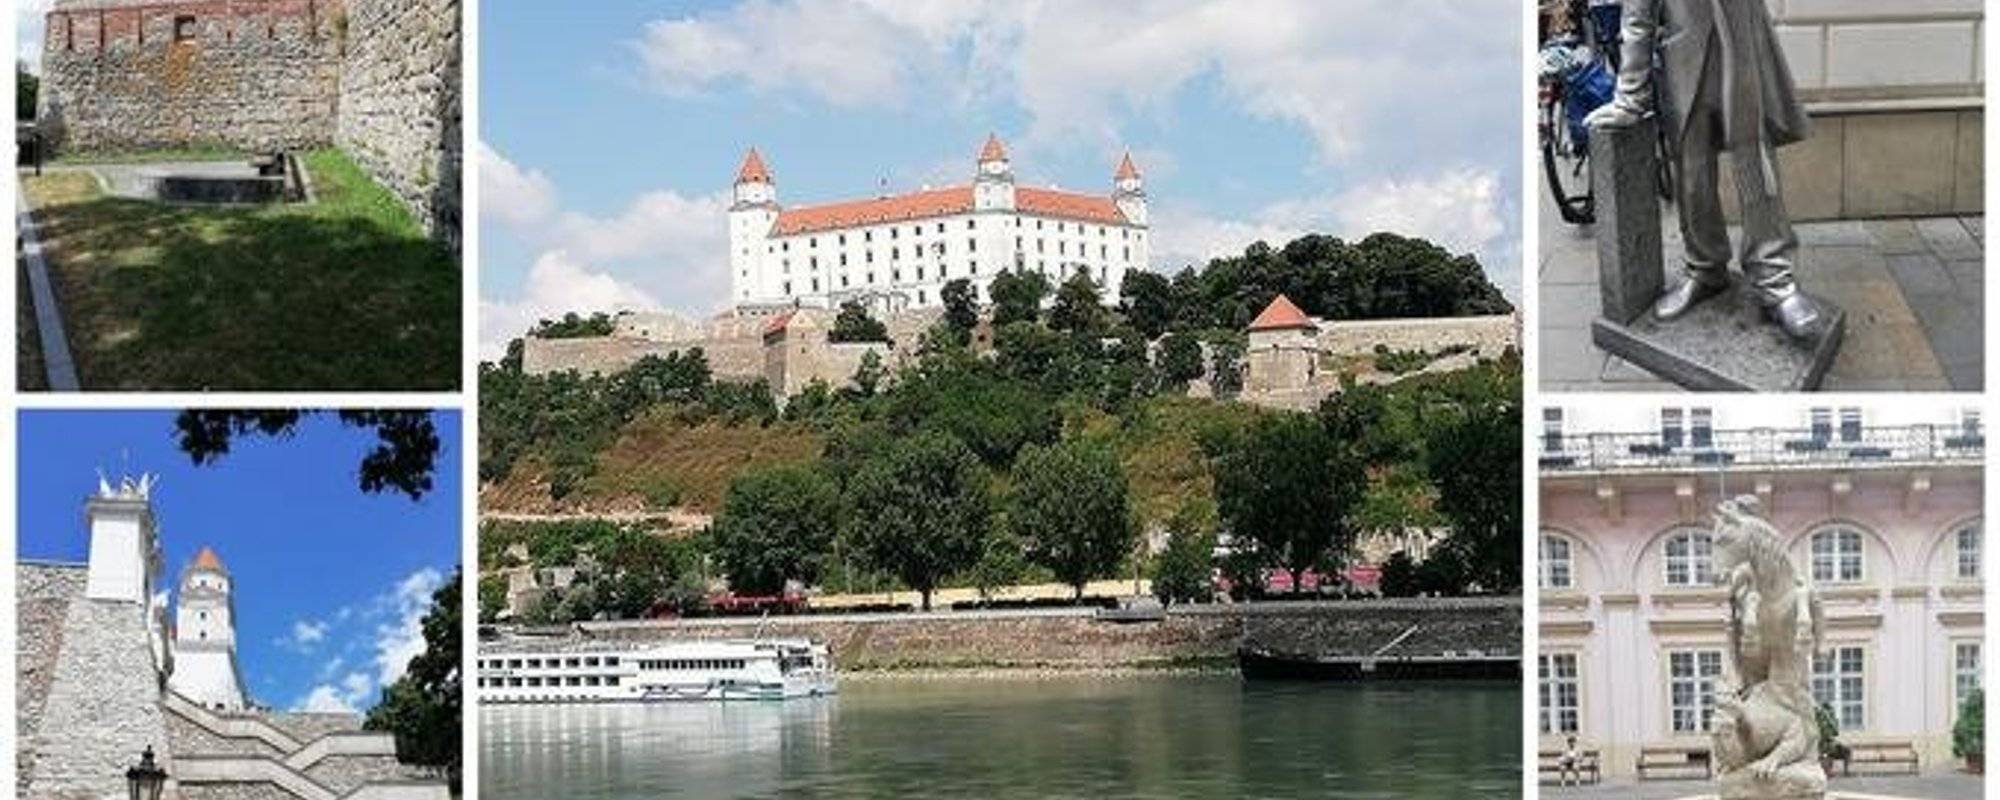 Bratislava - Part 7 - Cruseships On The Danube And The National Theatre